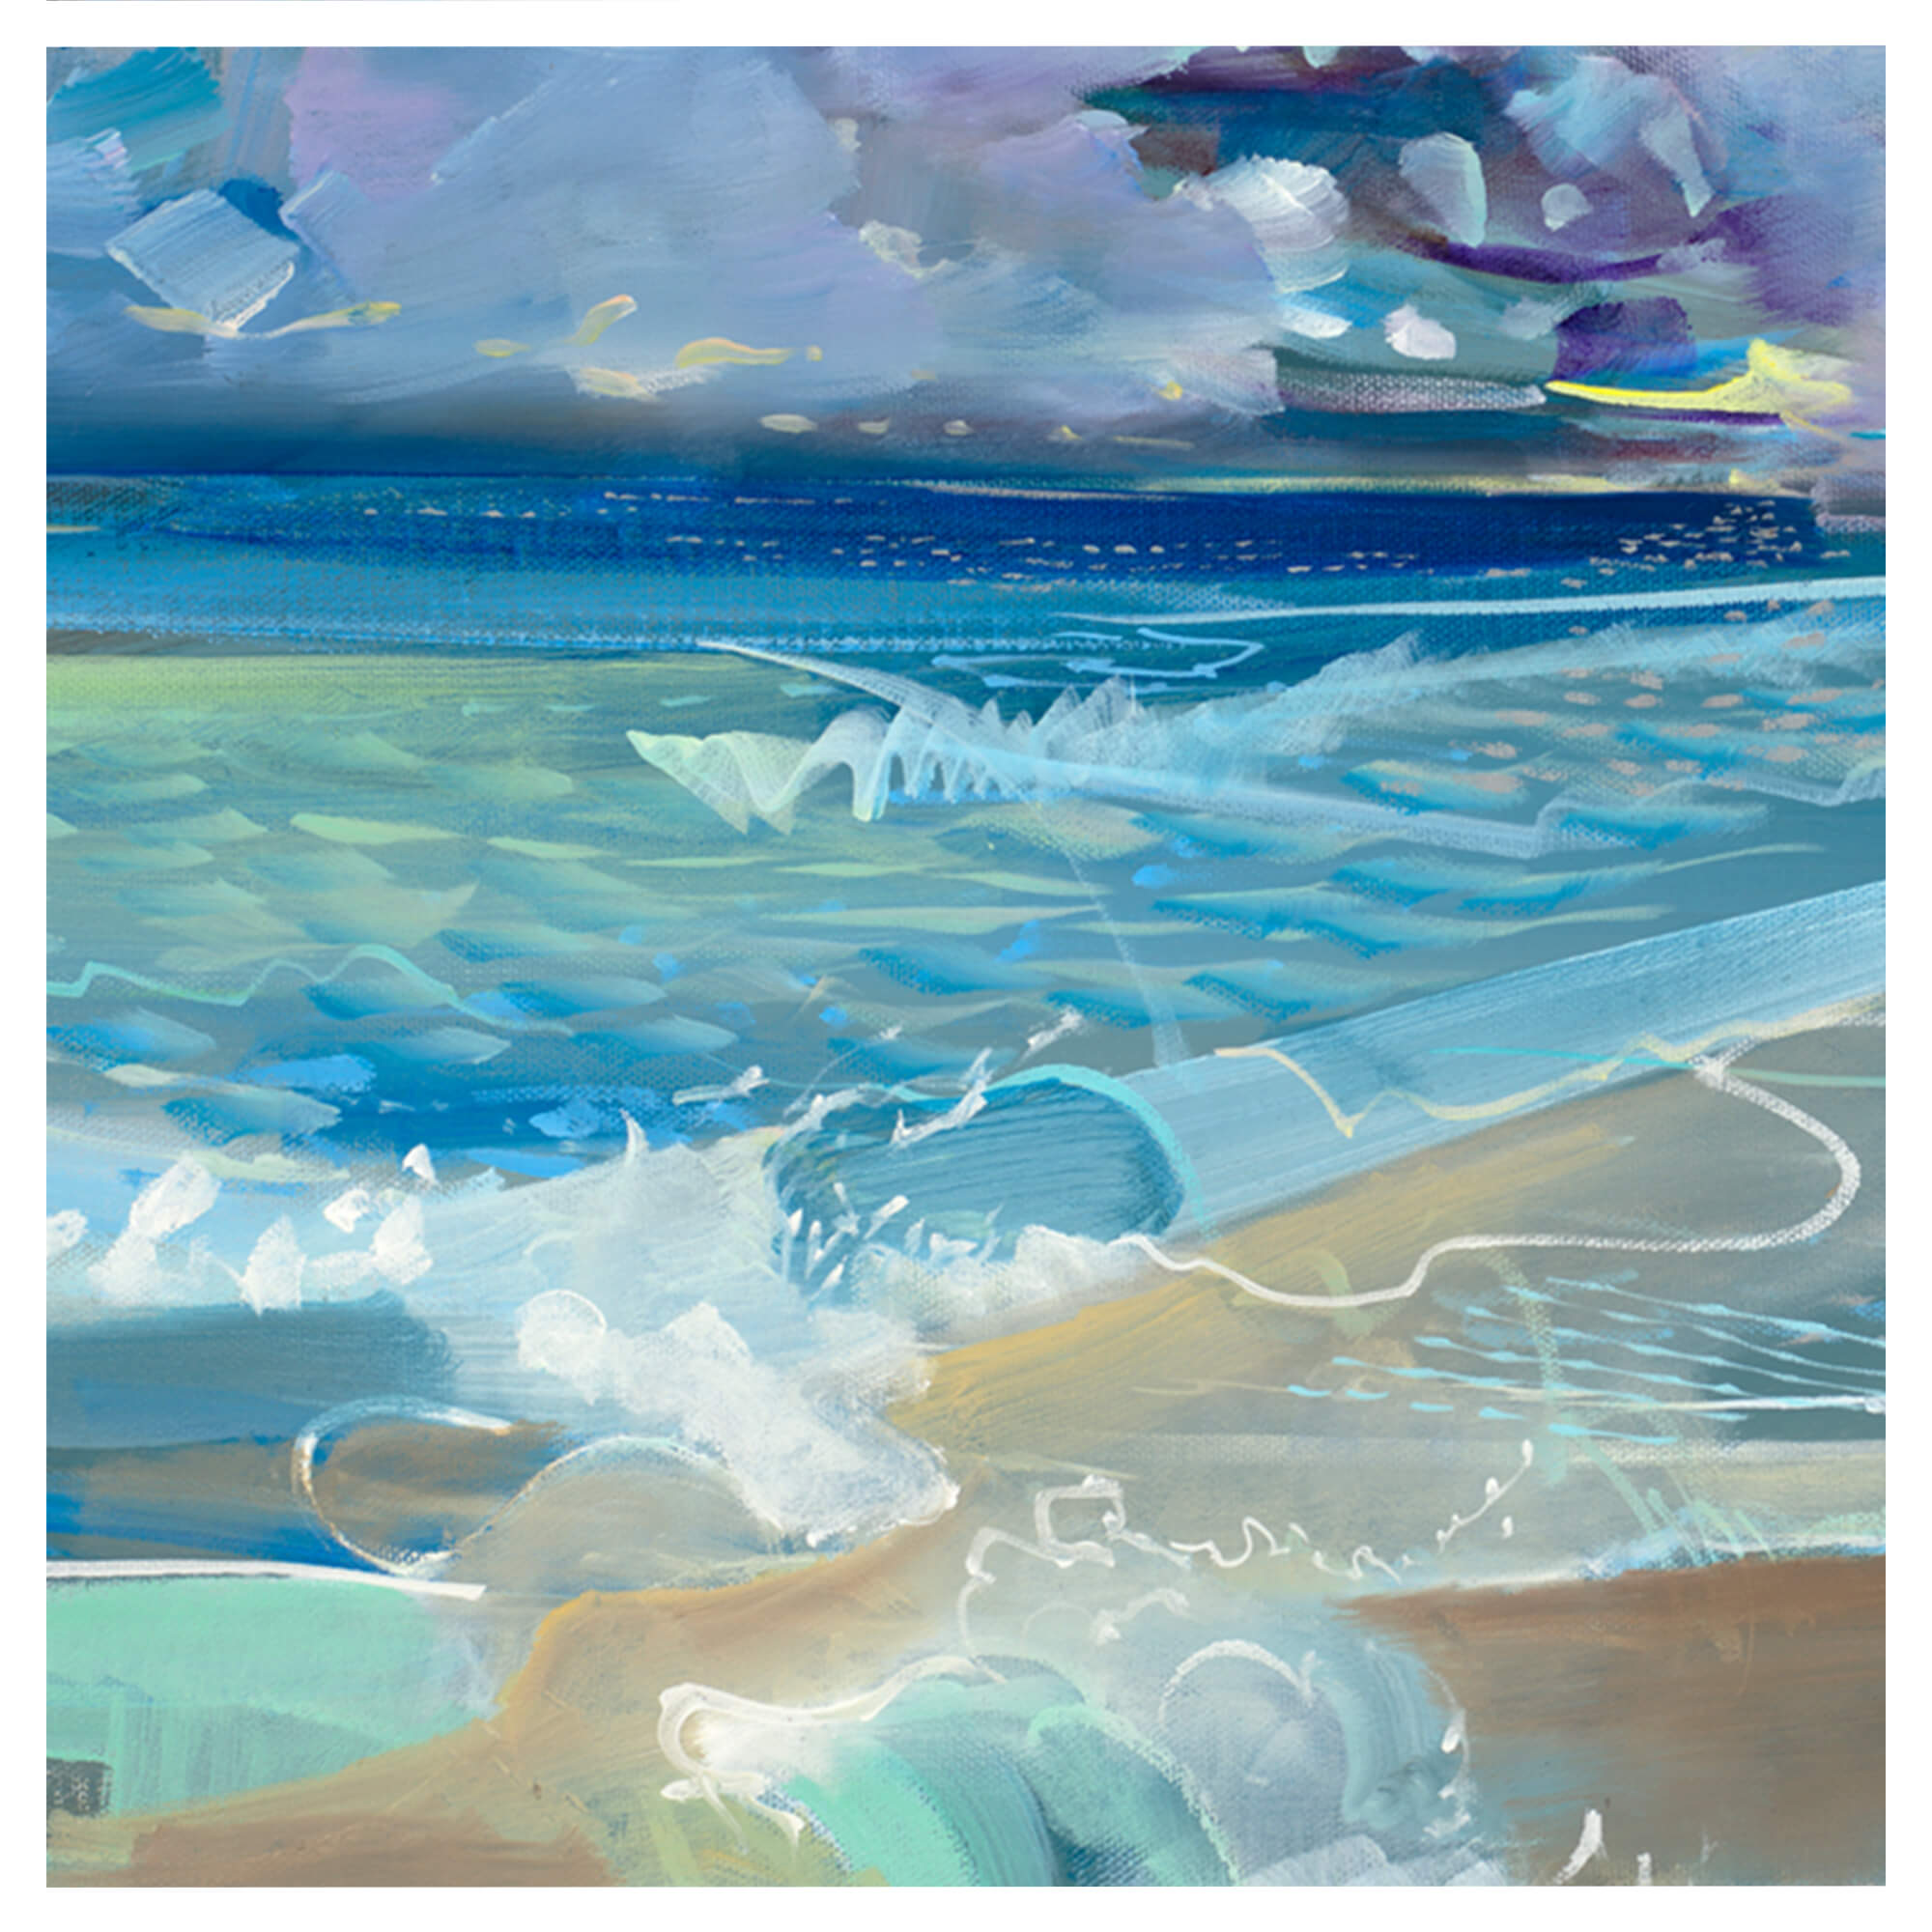 Painting of an abstract seascape by Hawaii artist Saumolie Puapuaga